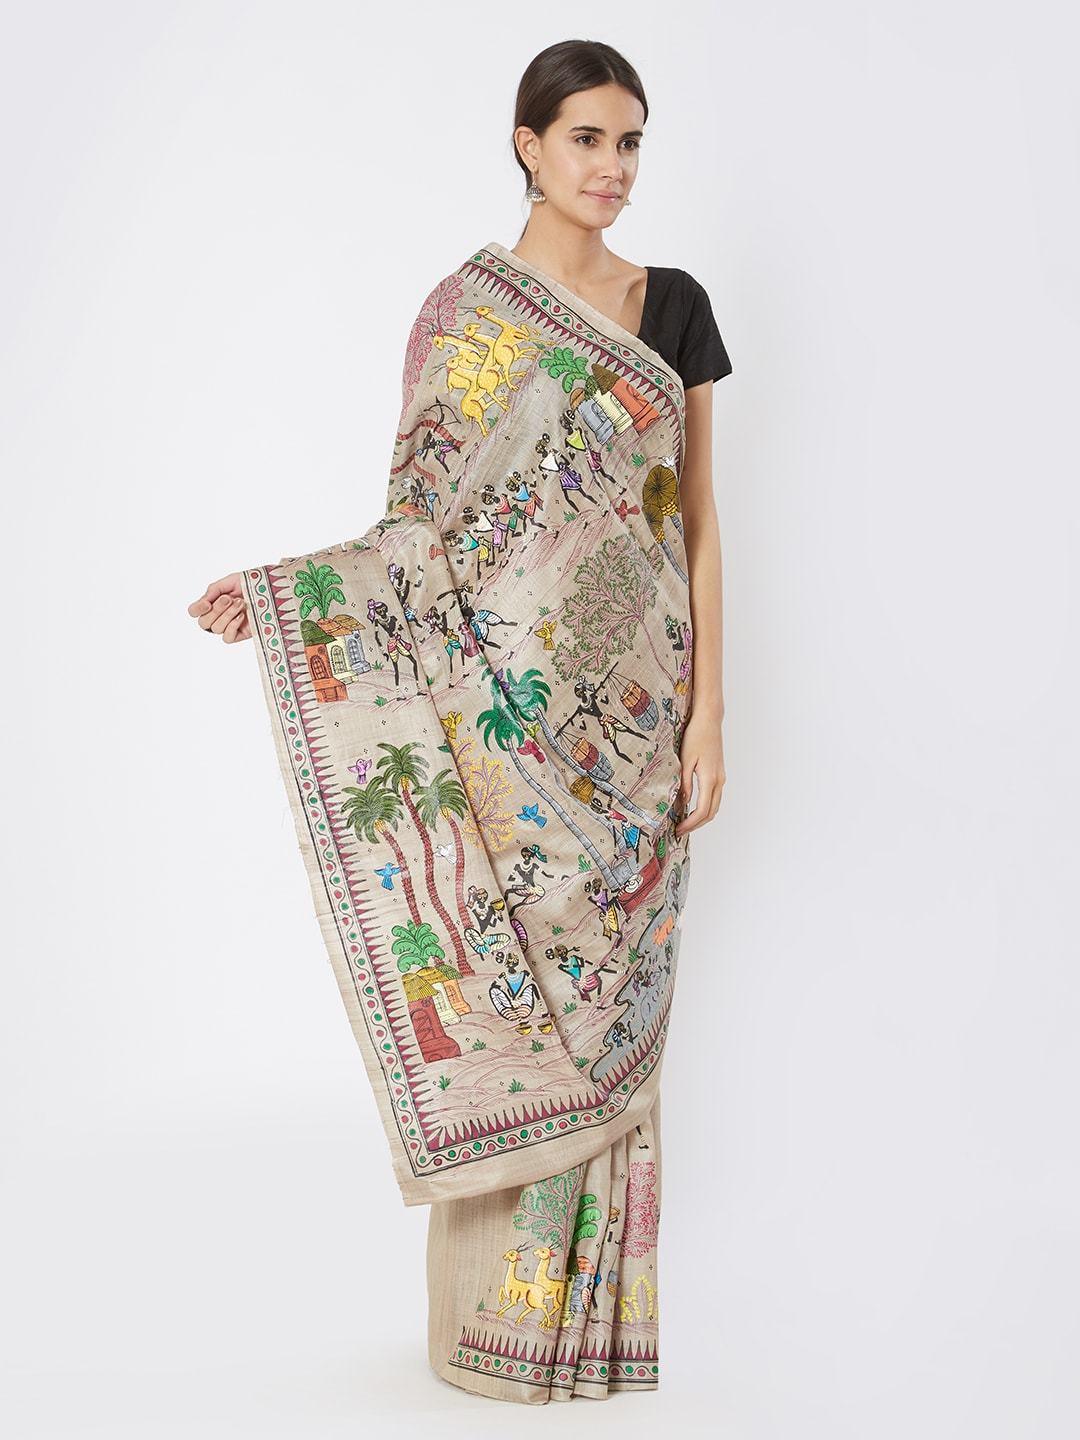 CraftsCollection.in - Beige Tussar Silk Saree with Tribal Motifs and Ikkat Blouse